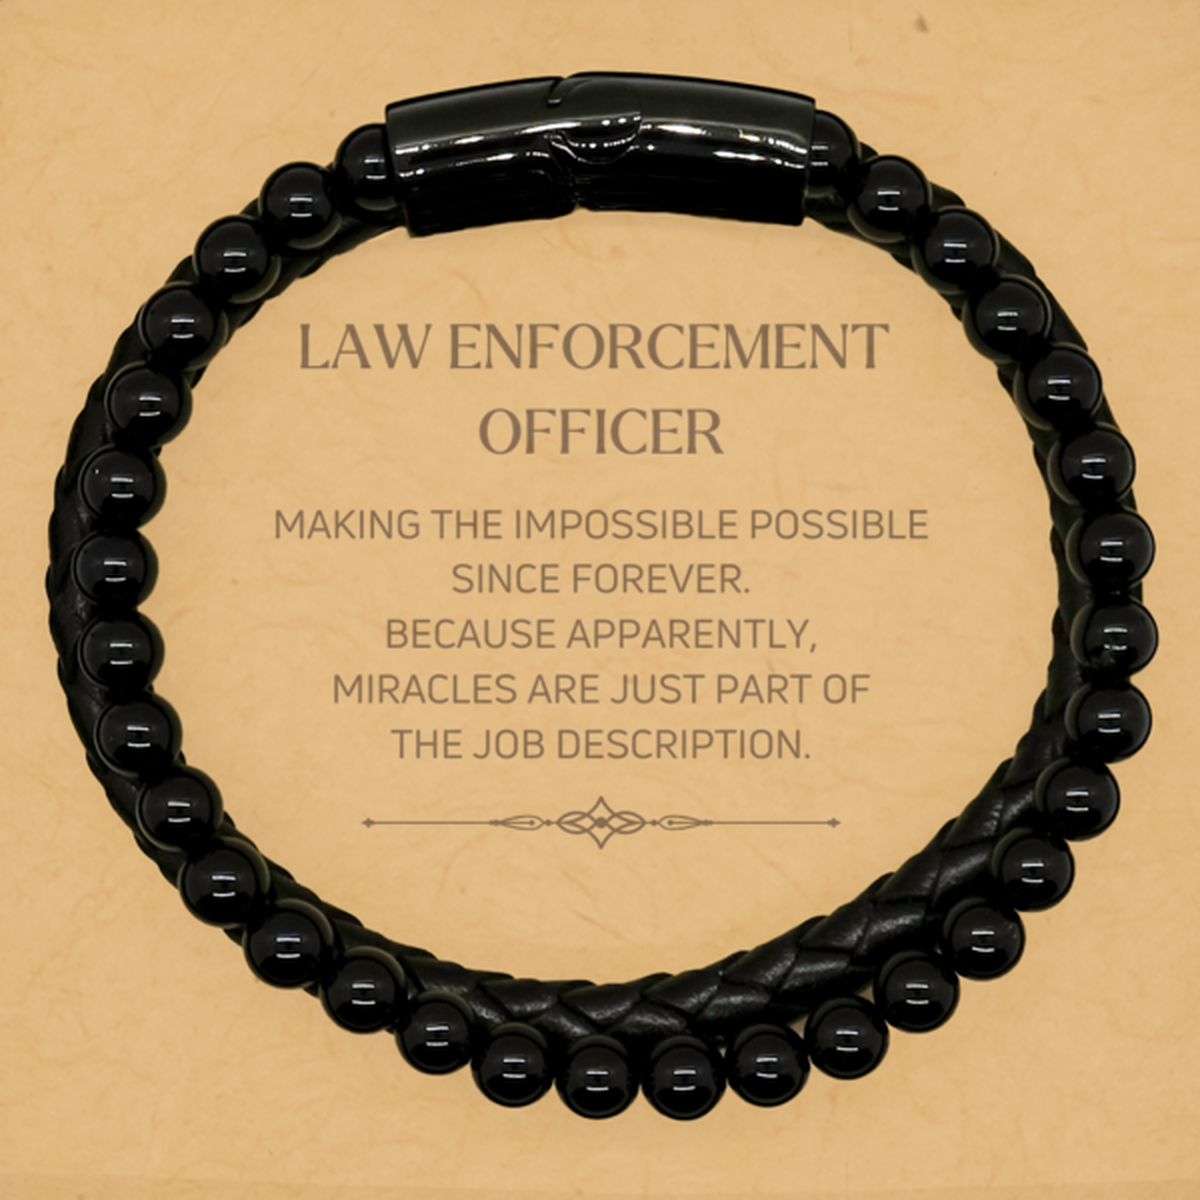 Funny Law Enforcement Officer Gifts, Miracles are just part of the job description, Inspirational Birthday Stone Leather Bracelets For Law Enforcement Officer, Men, Women, Coworkers, Friends, Boss